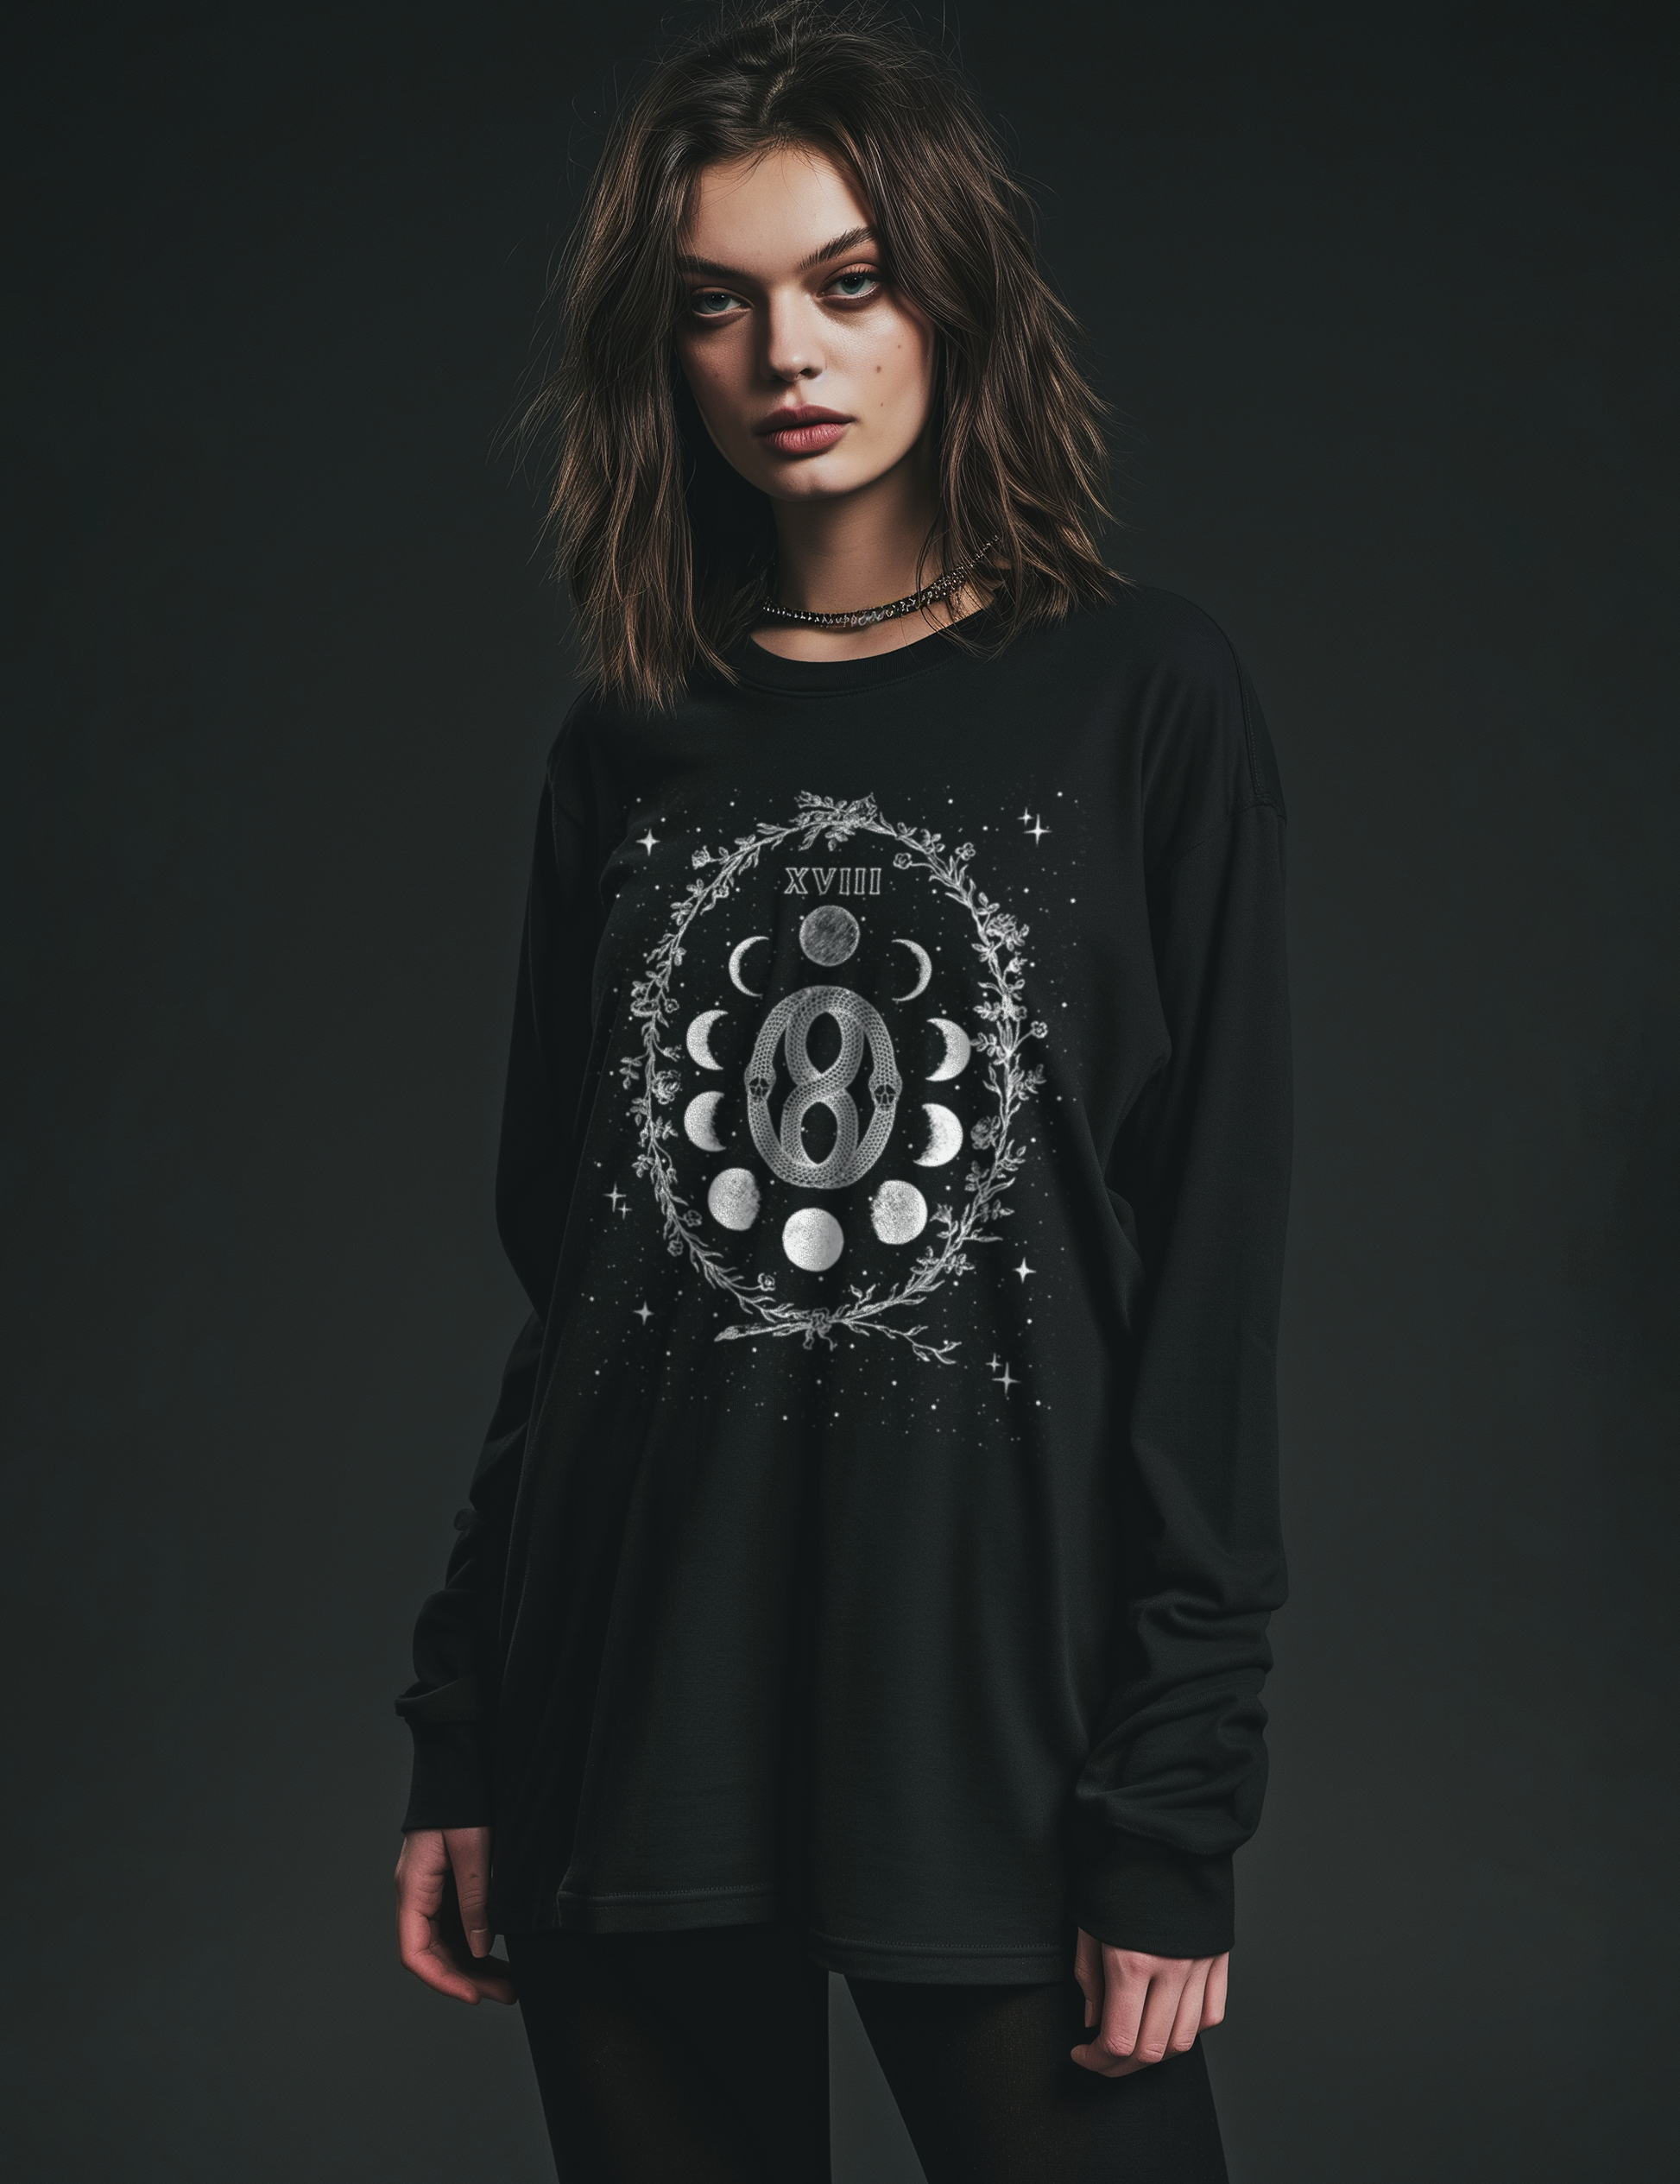 The Moon Tarot Card Occult Plus Size Witchy Whimsigoth Clothing Long Sleeve Shirt